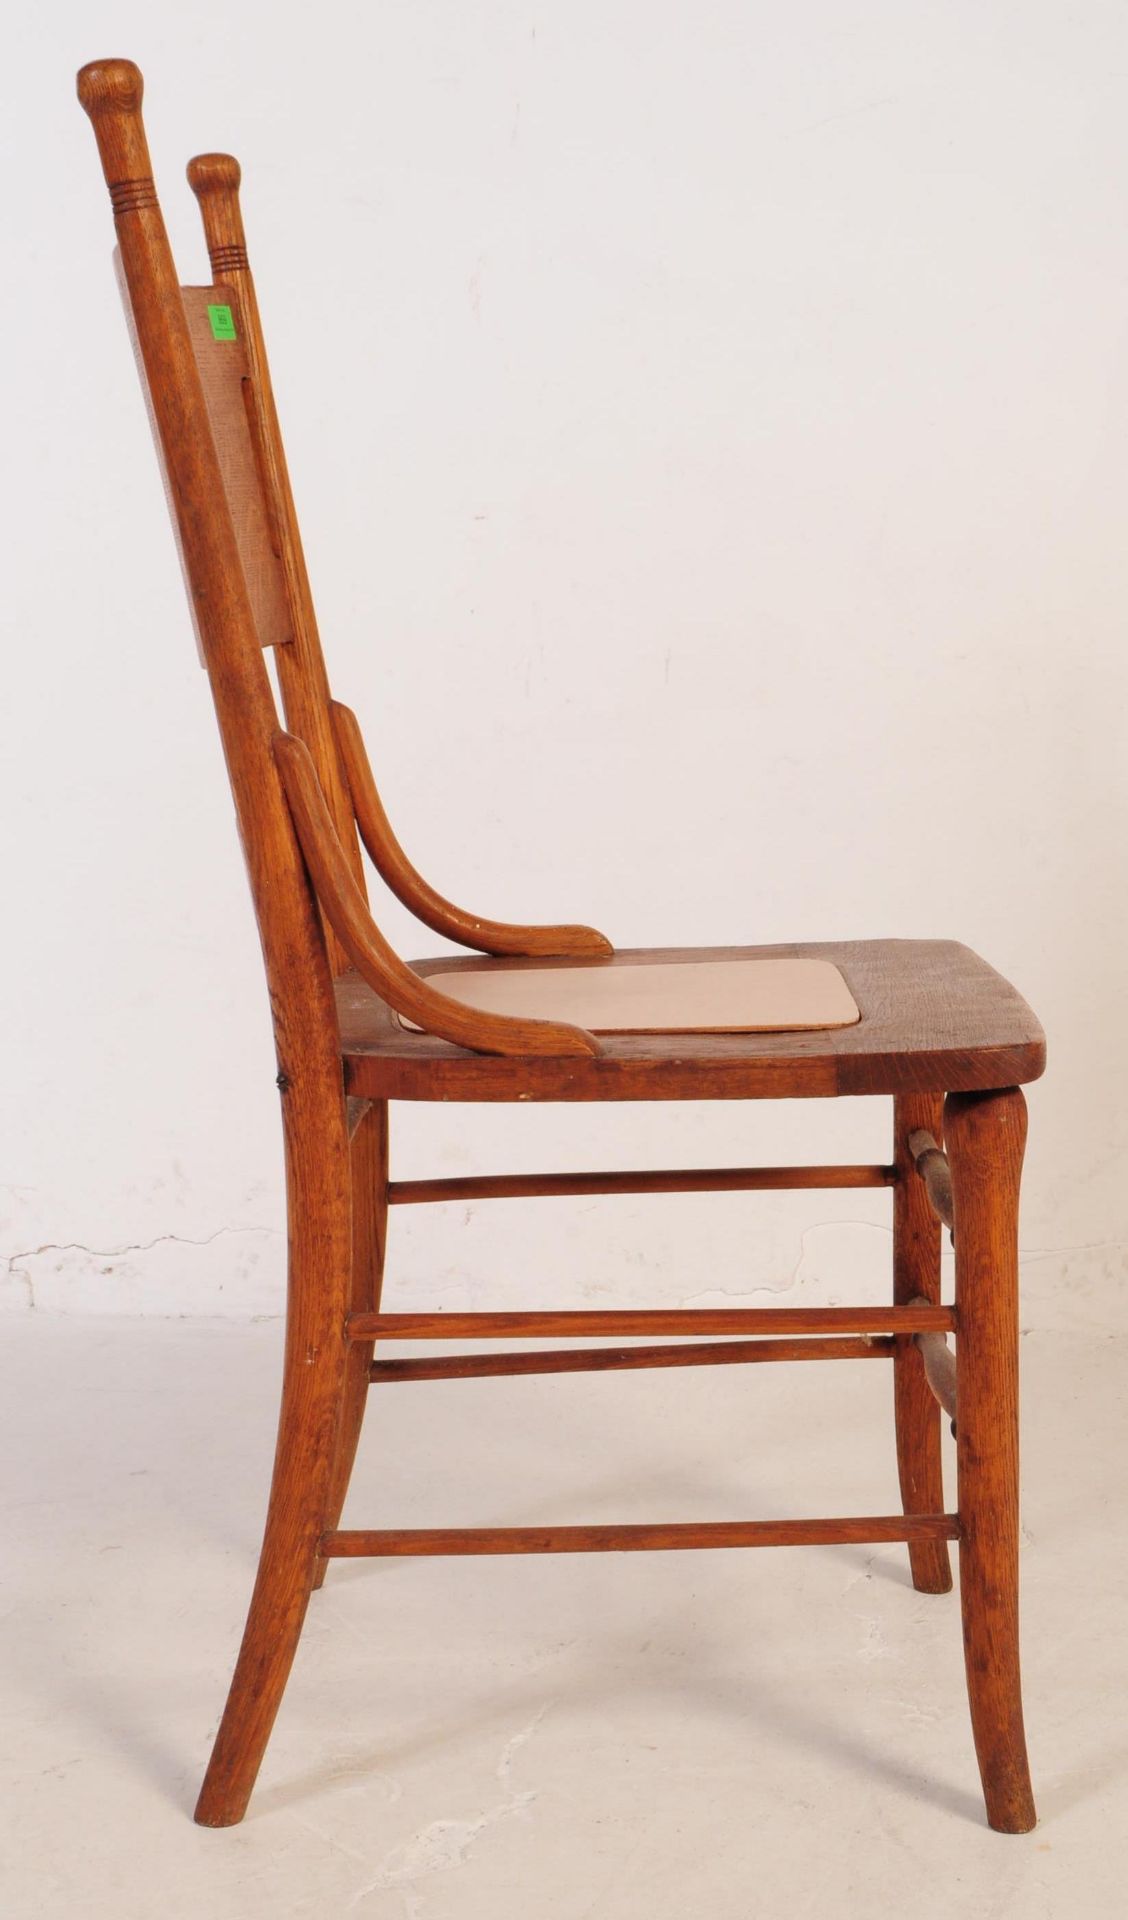 EARLY 20TH CENTURY ARTS & CRAFTS OAK HALL ARMCHAIR - Image 10 of 16